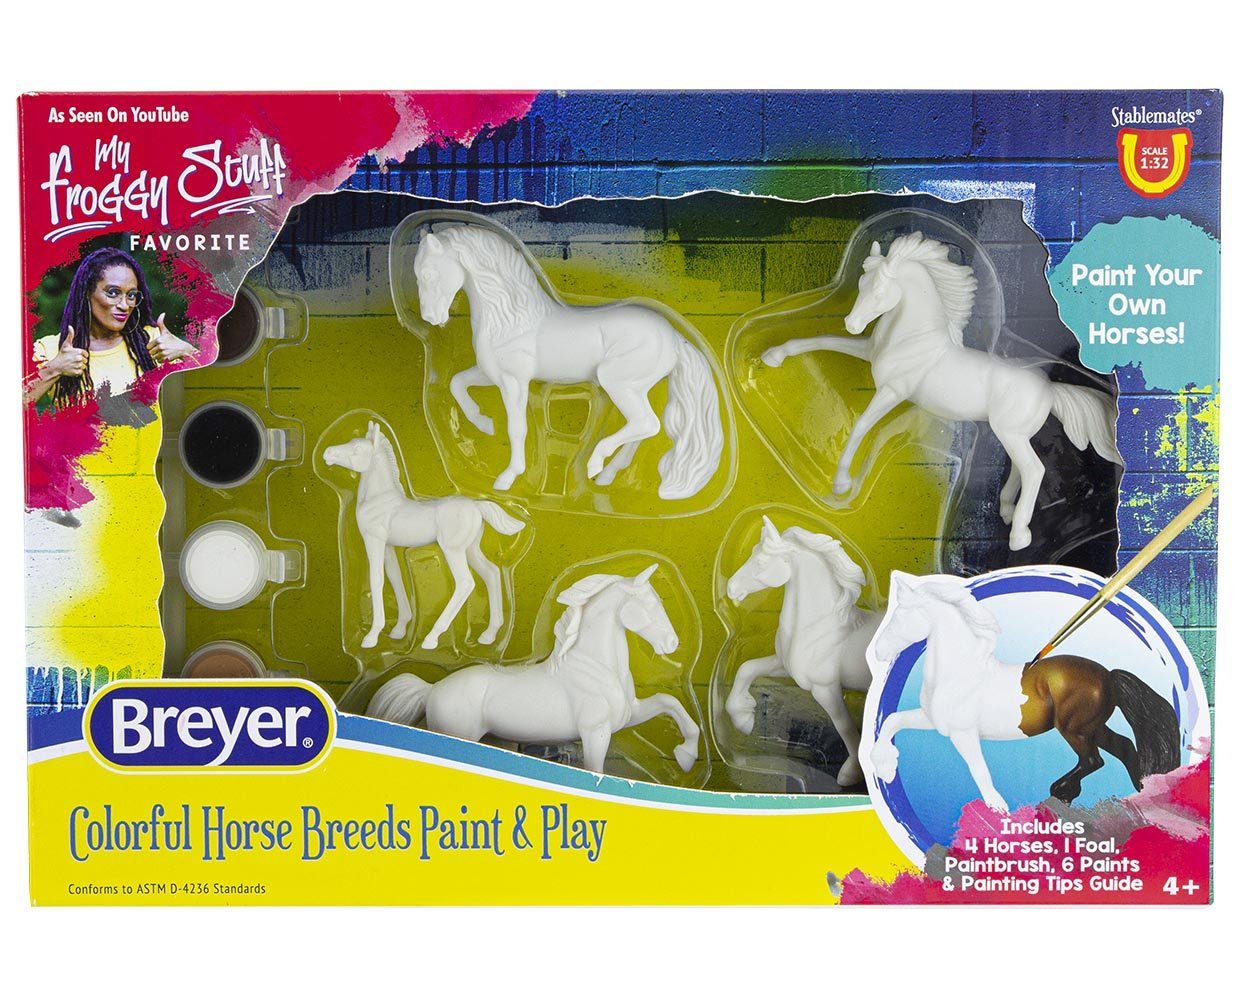 COLORFUL BREEDS PAINT & PLAY